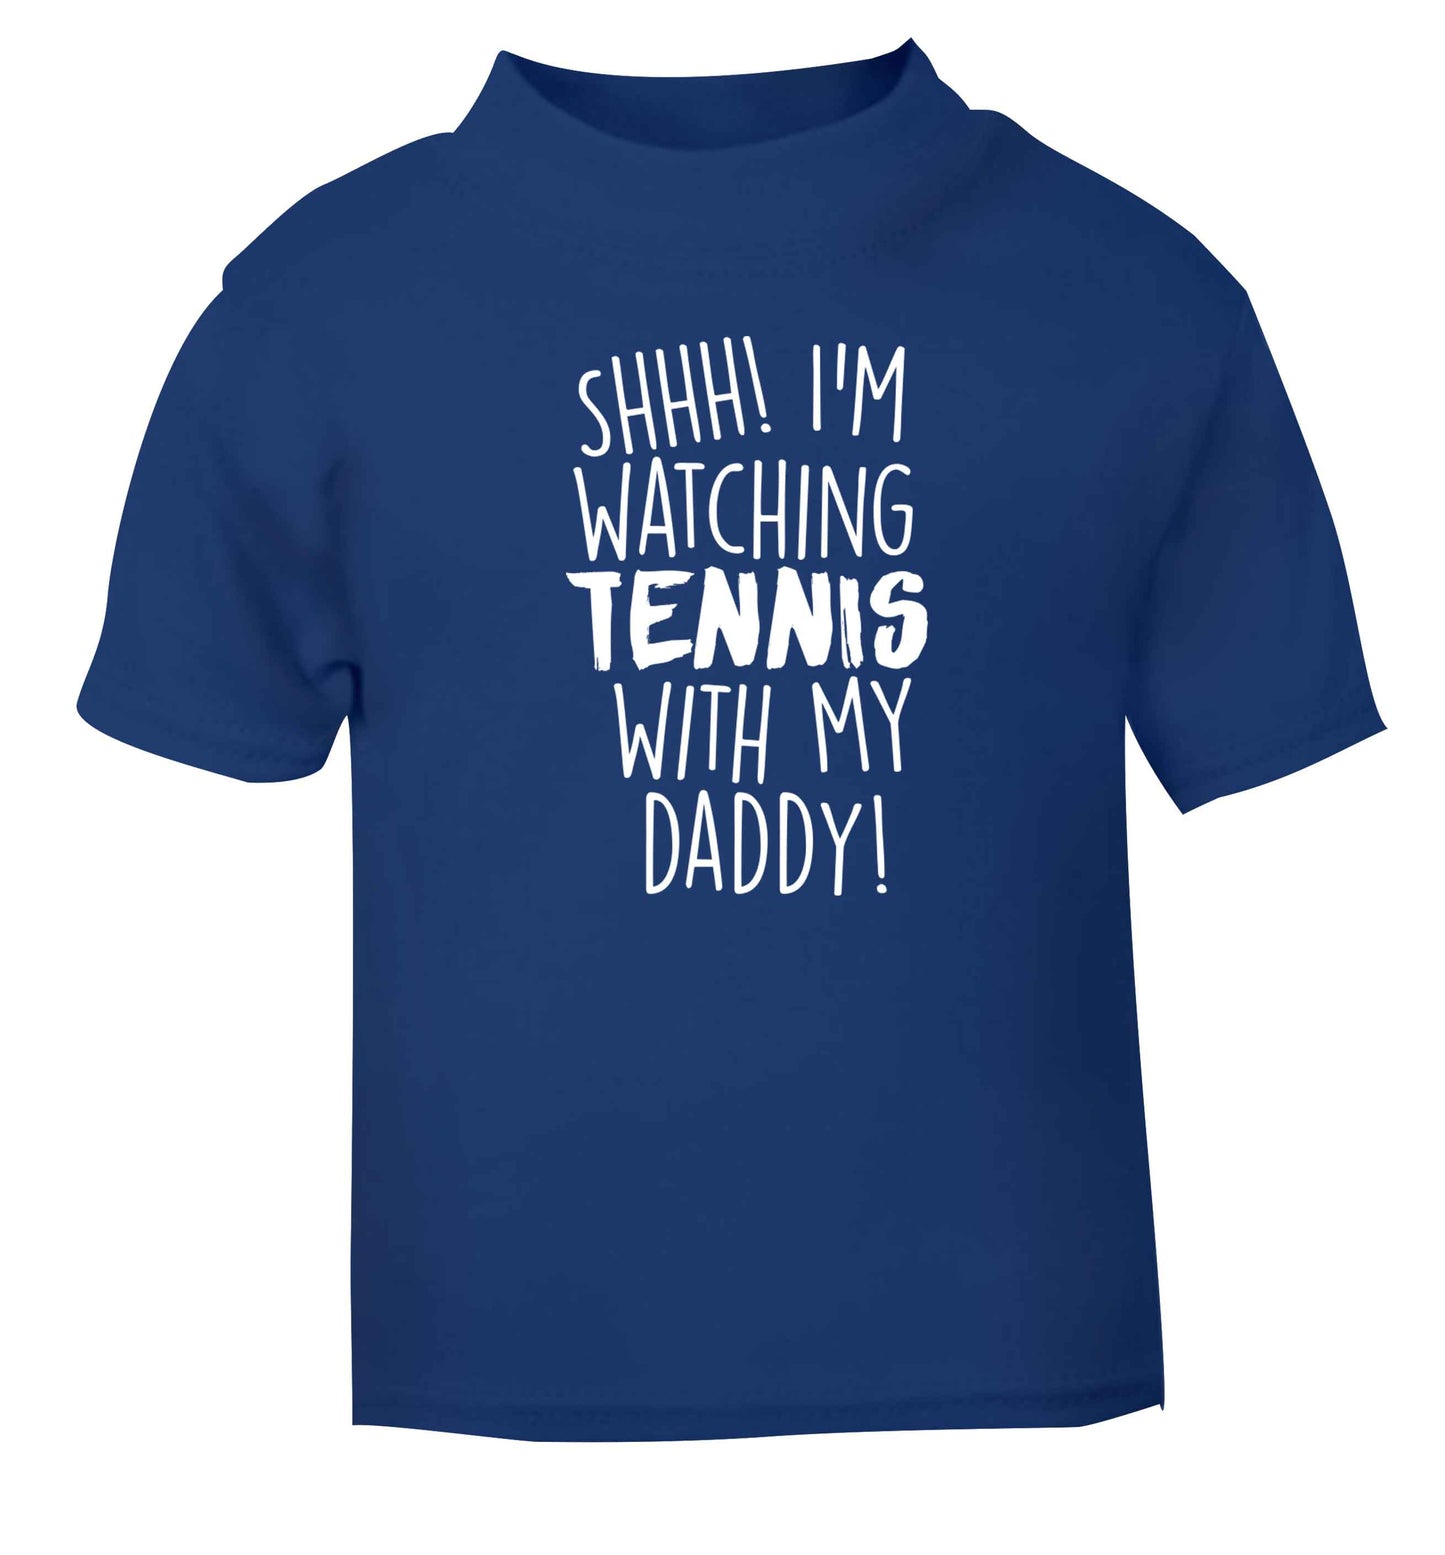 Shh! I'm watching tennis with my daddy! blue Baby Toddler Tshirt 2 Years